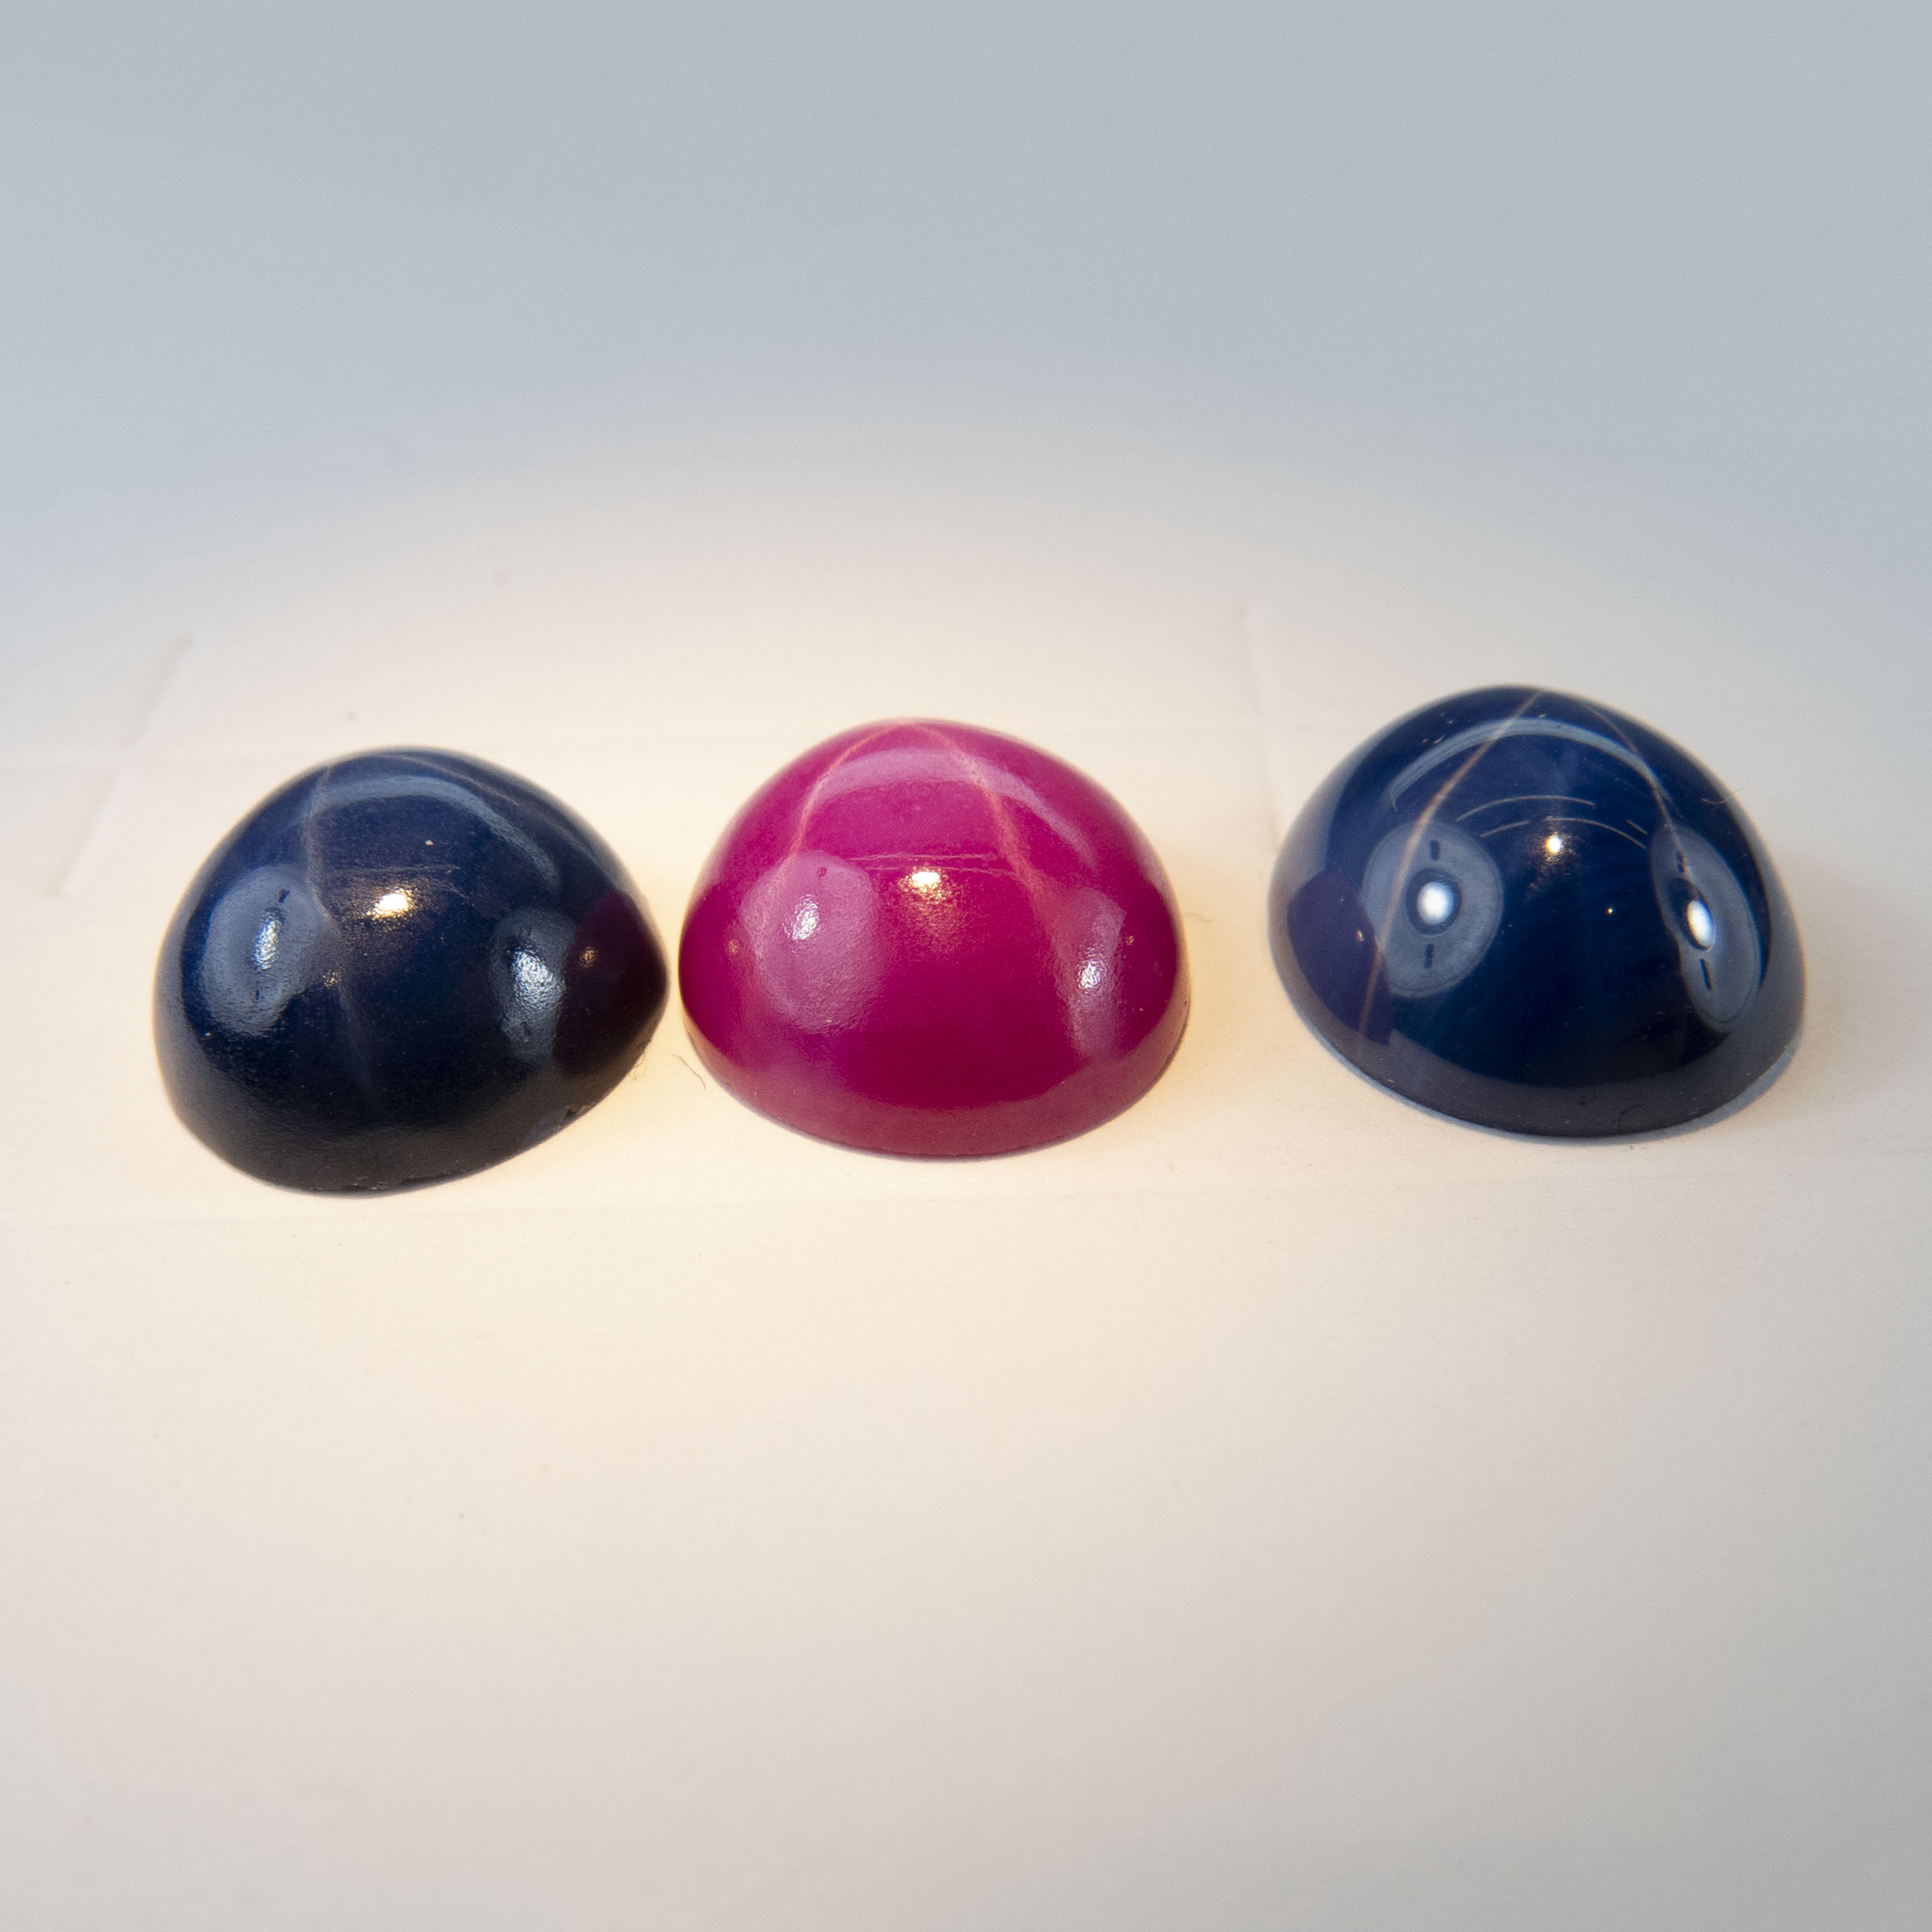 Synthetic Oval Star Ruby And 2 Synthetic Oval Star Sapphire Cabochons